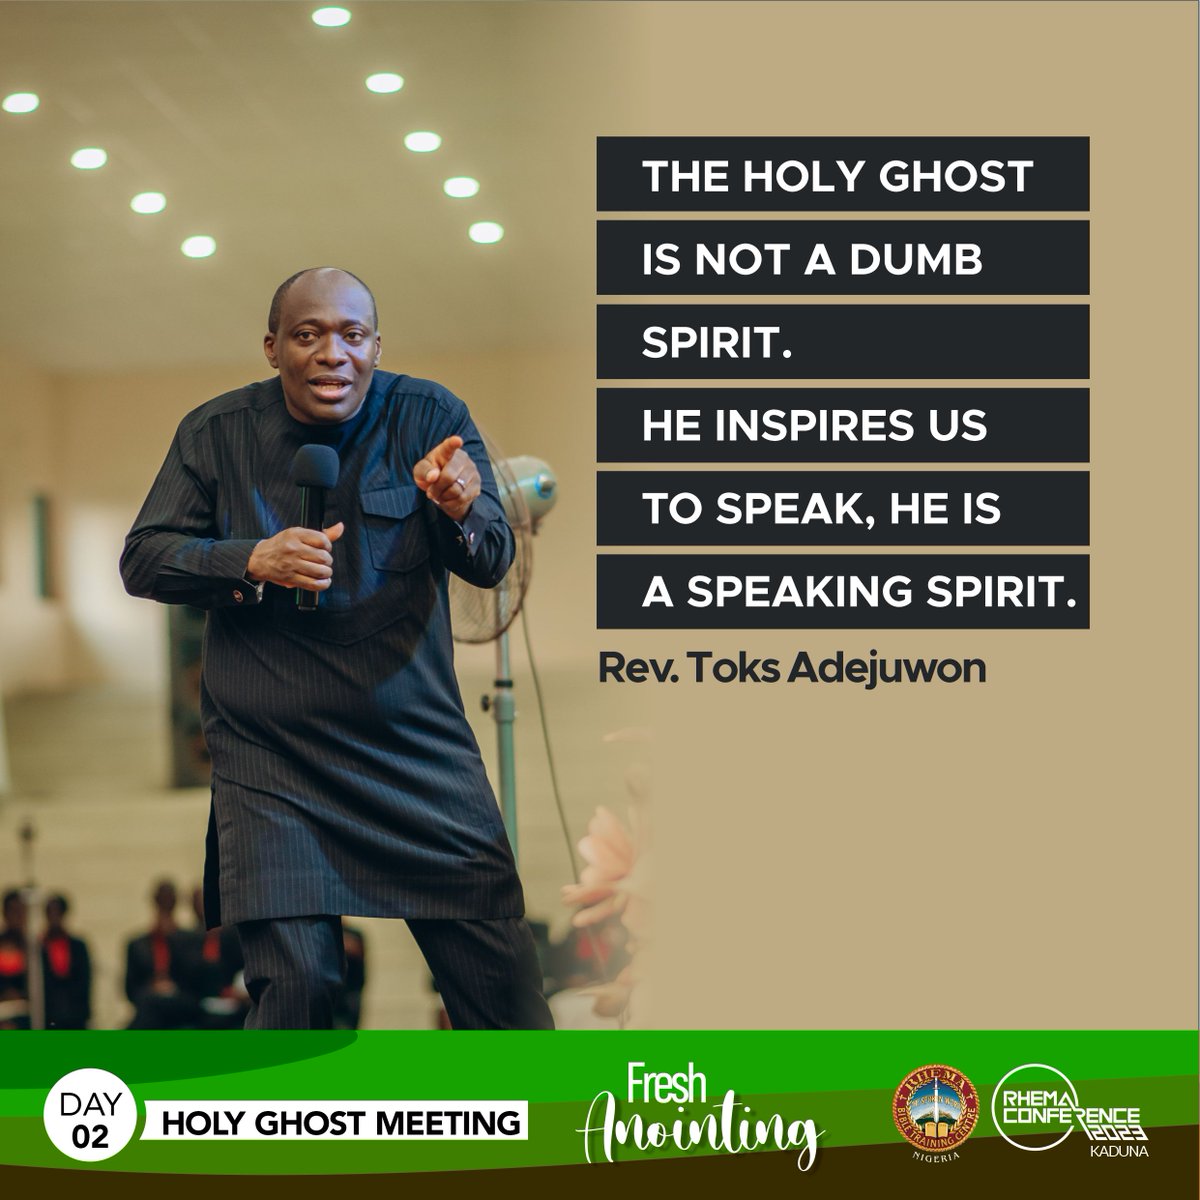 The Holy Ghost is not a dumb Spirit.
He inspires us to speak, 
He is a speaking spirit.

Rev. @ToksAdejuwon
.
.
.
#RhemaConference23 #RC2023 #RCKaduna #DayTwo #HGM